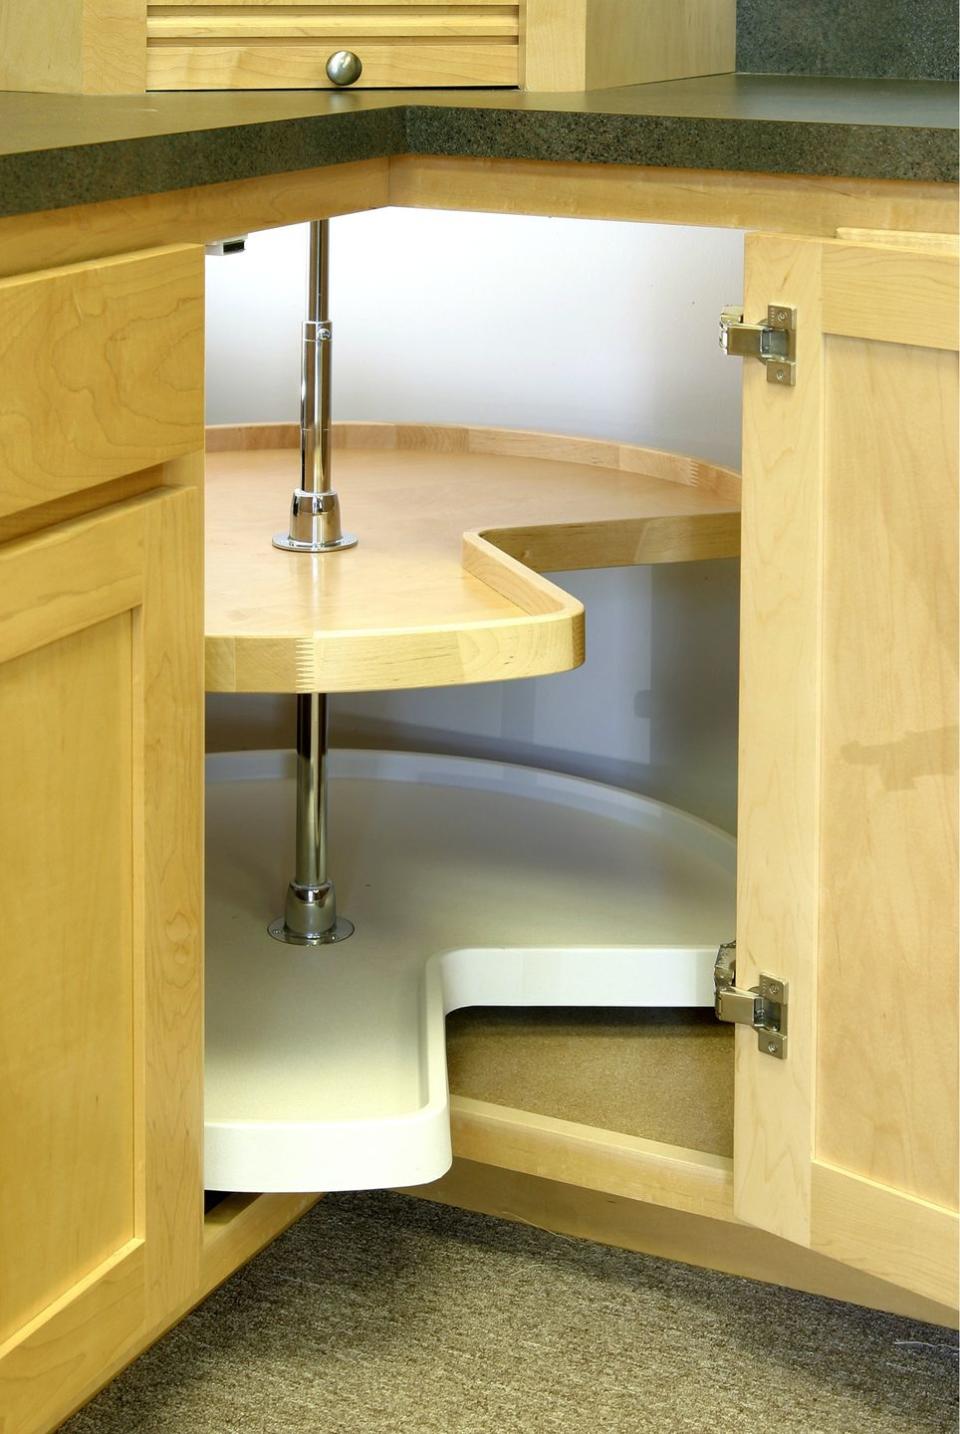 Make your cabinet space work harder.